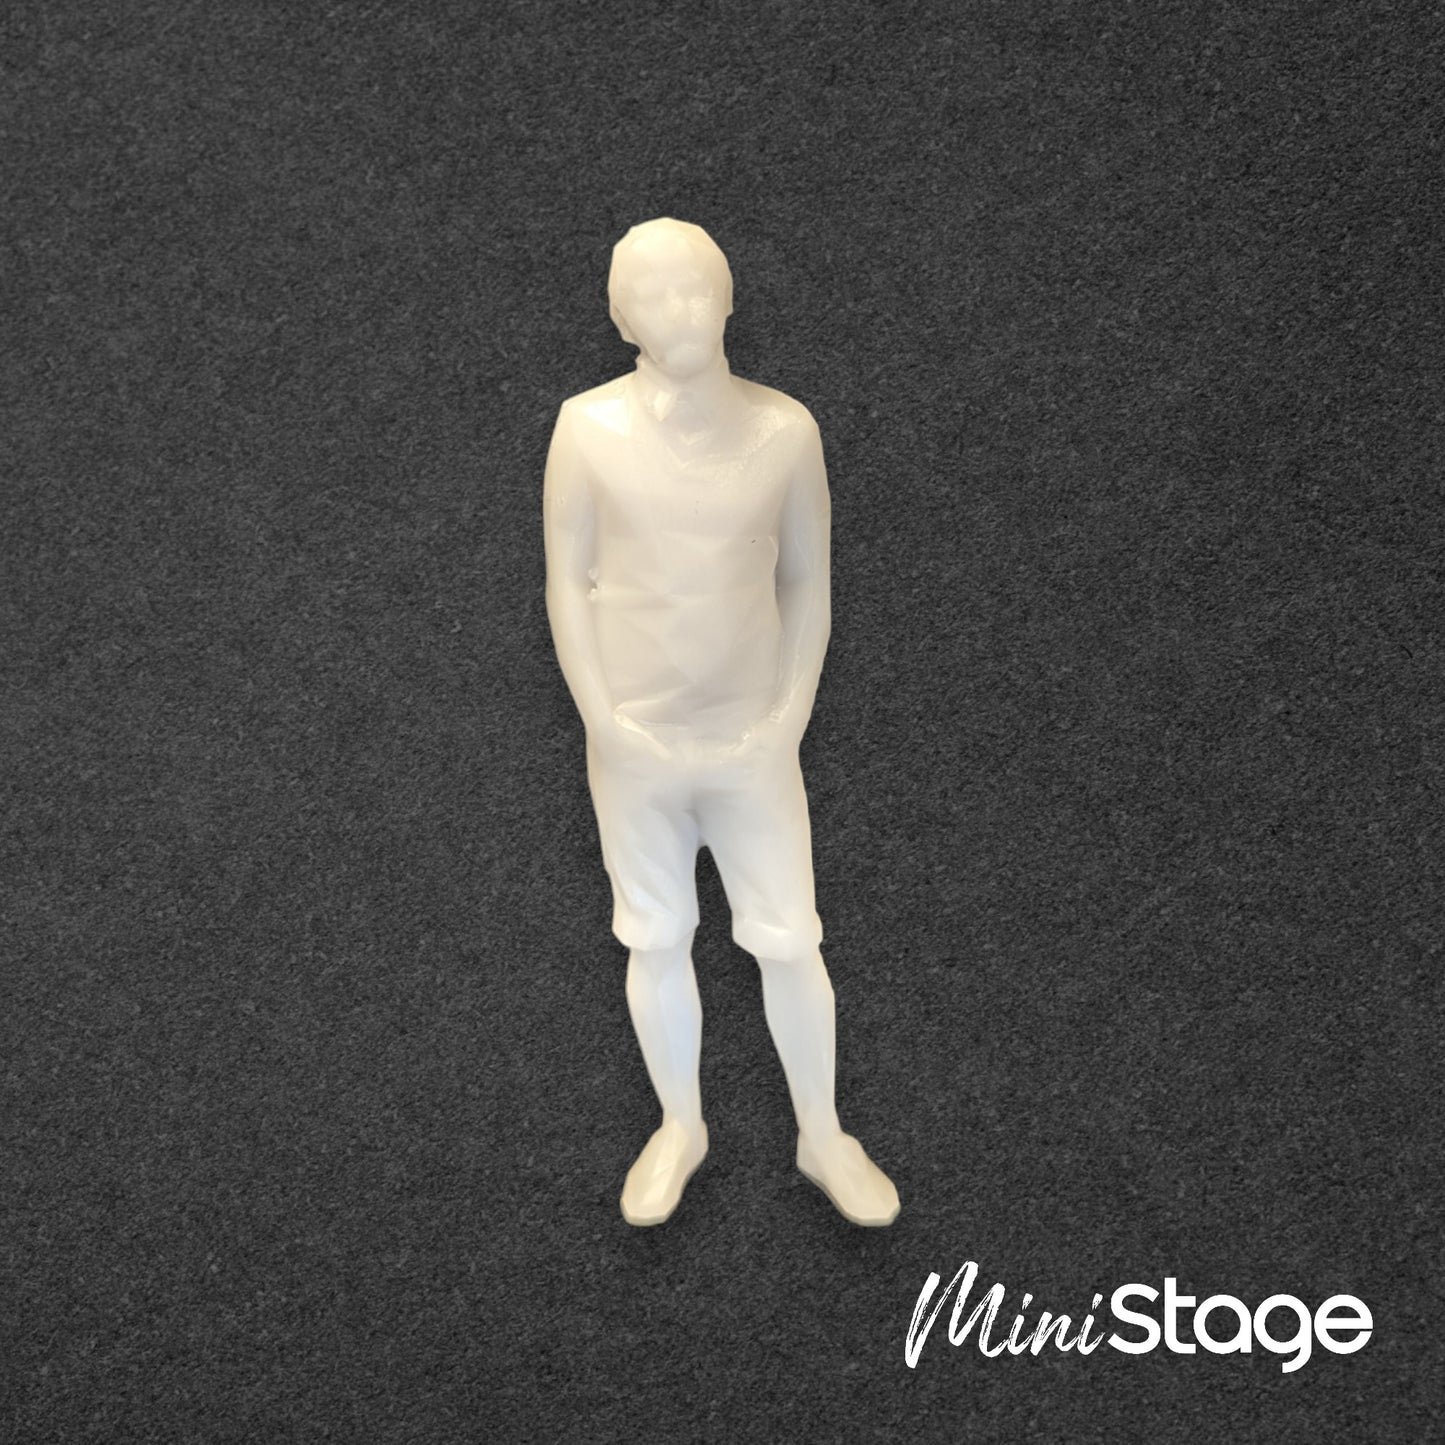 Robert - Set of Three Low Poly Scale Figures of a male with a Mustache and Beard wearing Casual Clothing.